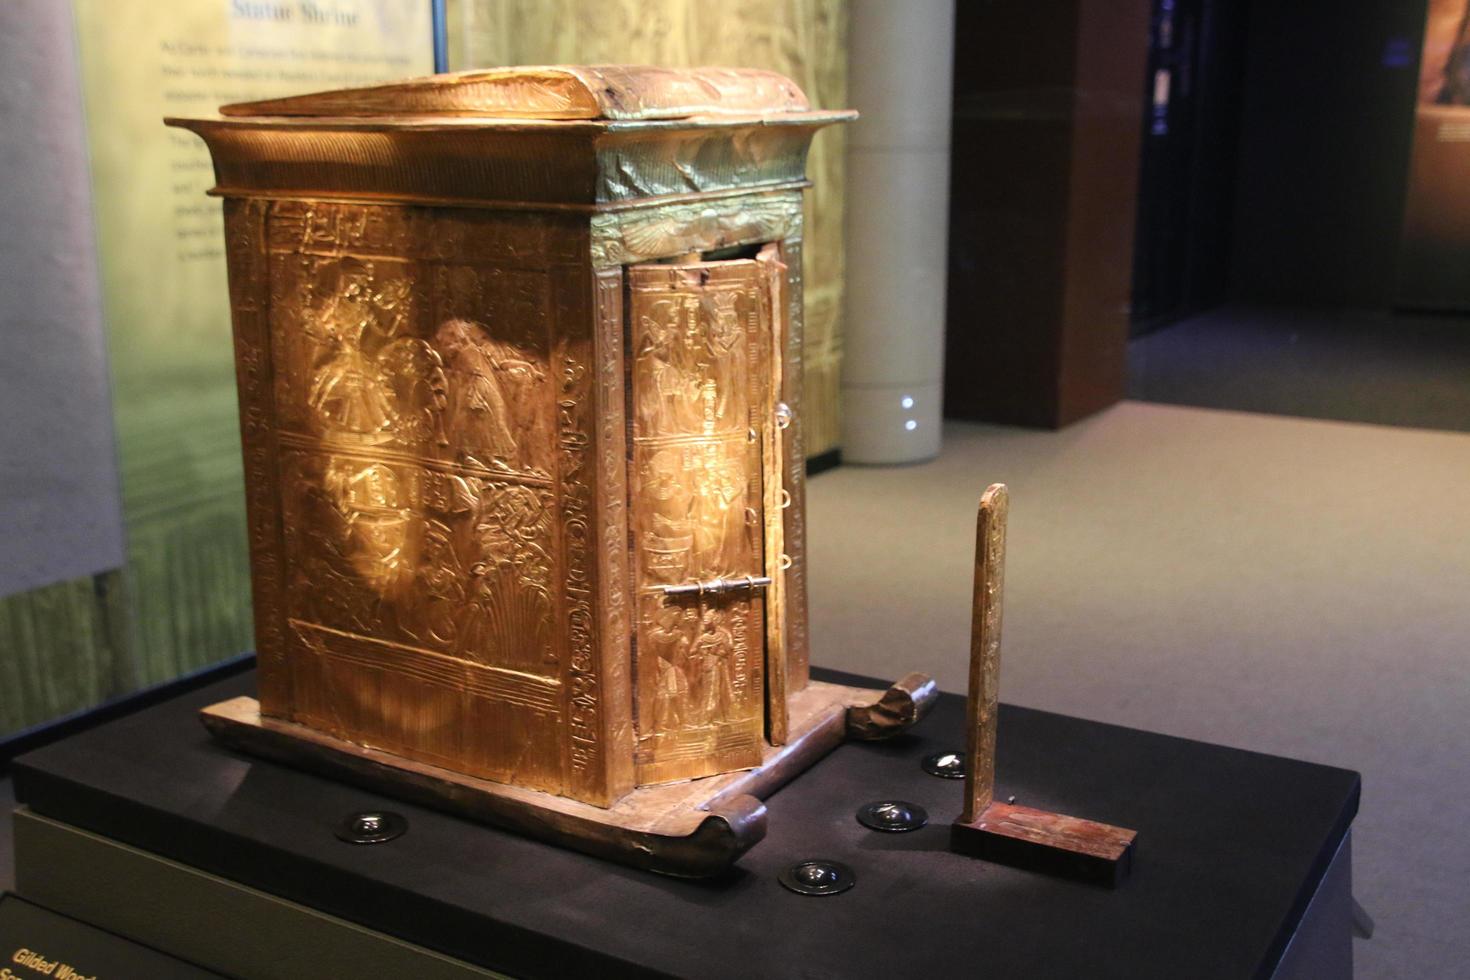 London in the UK in March 2020. A view of the Tutankhamun Exhibition in London photo